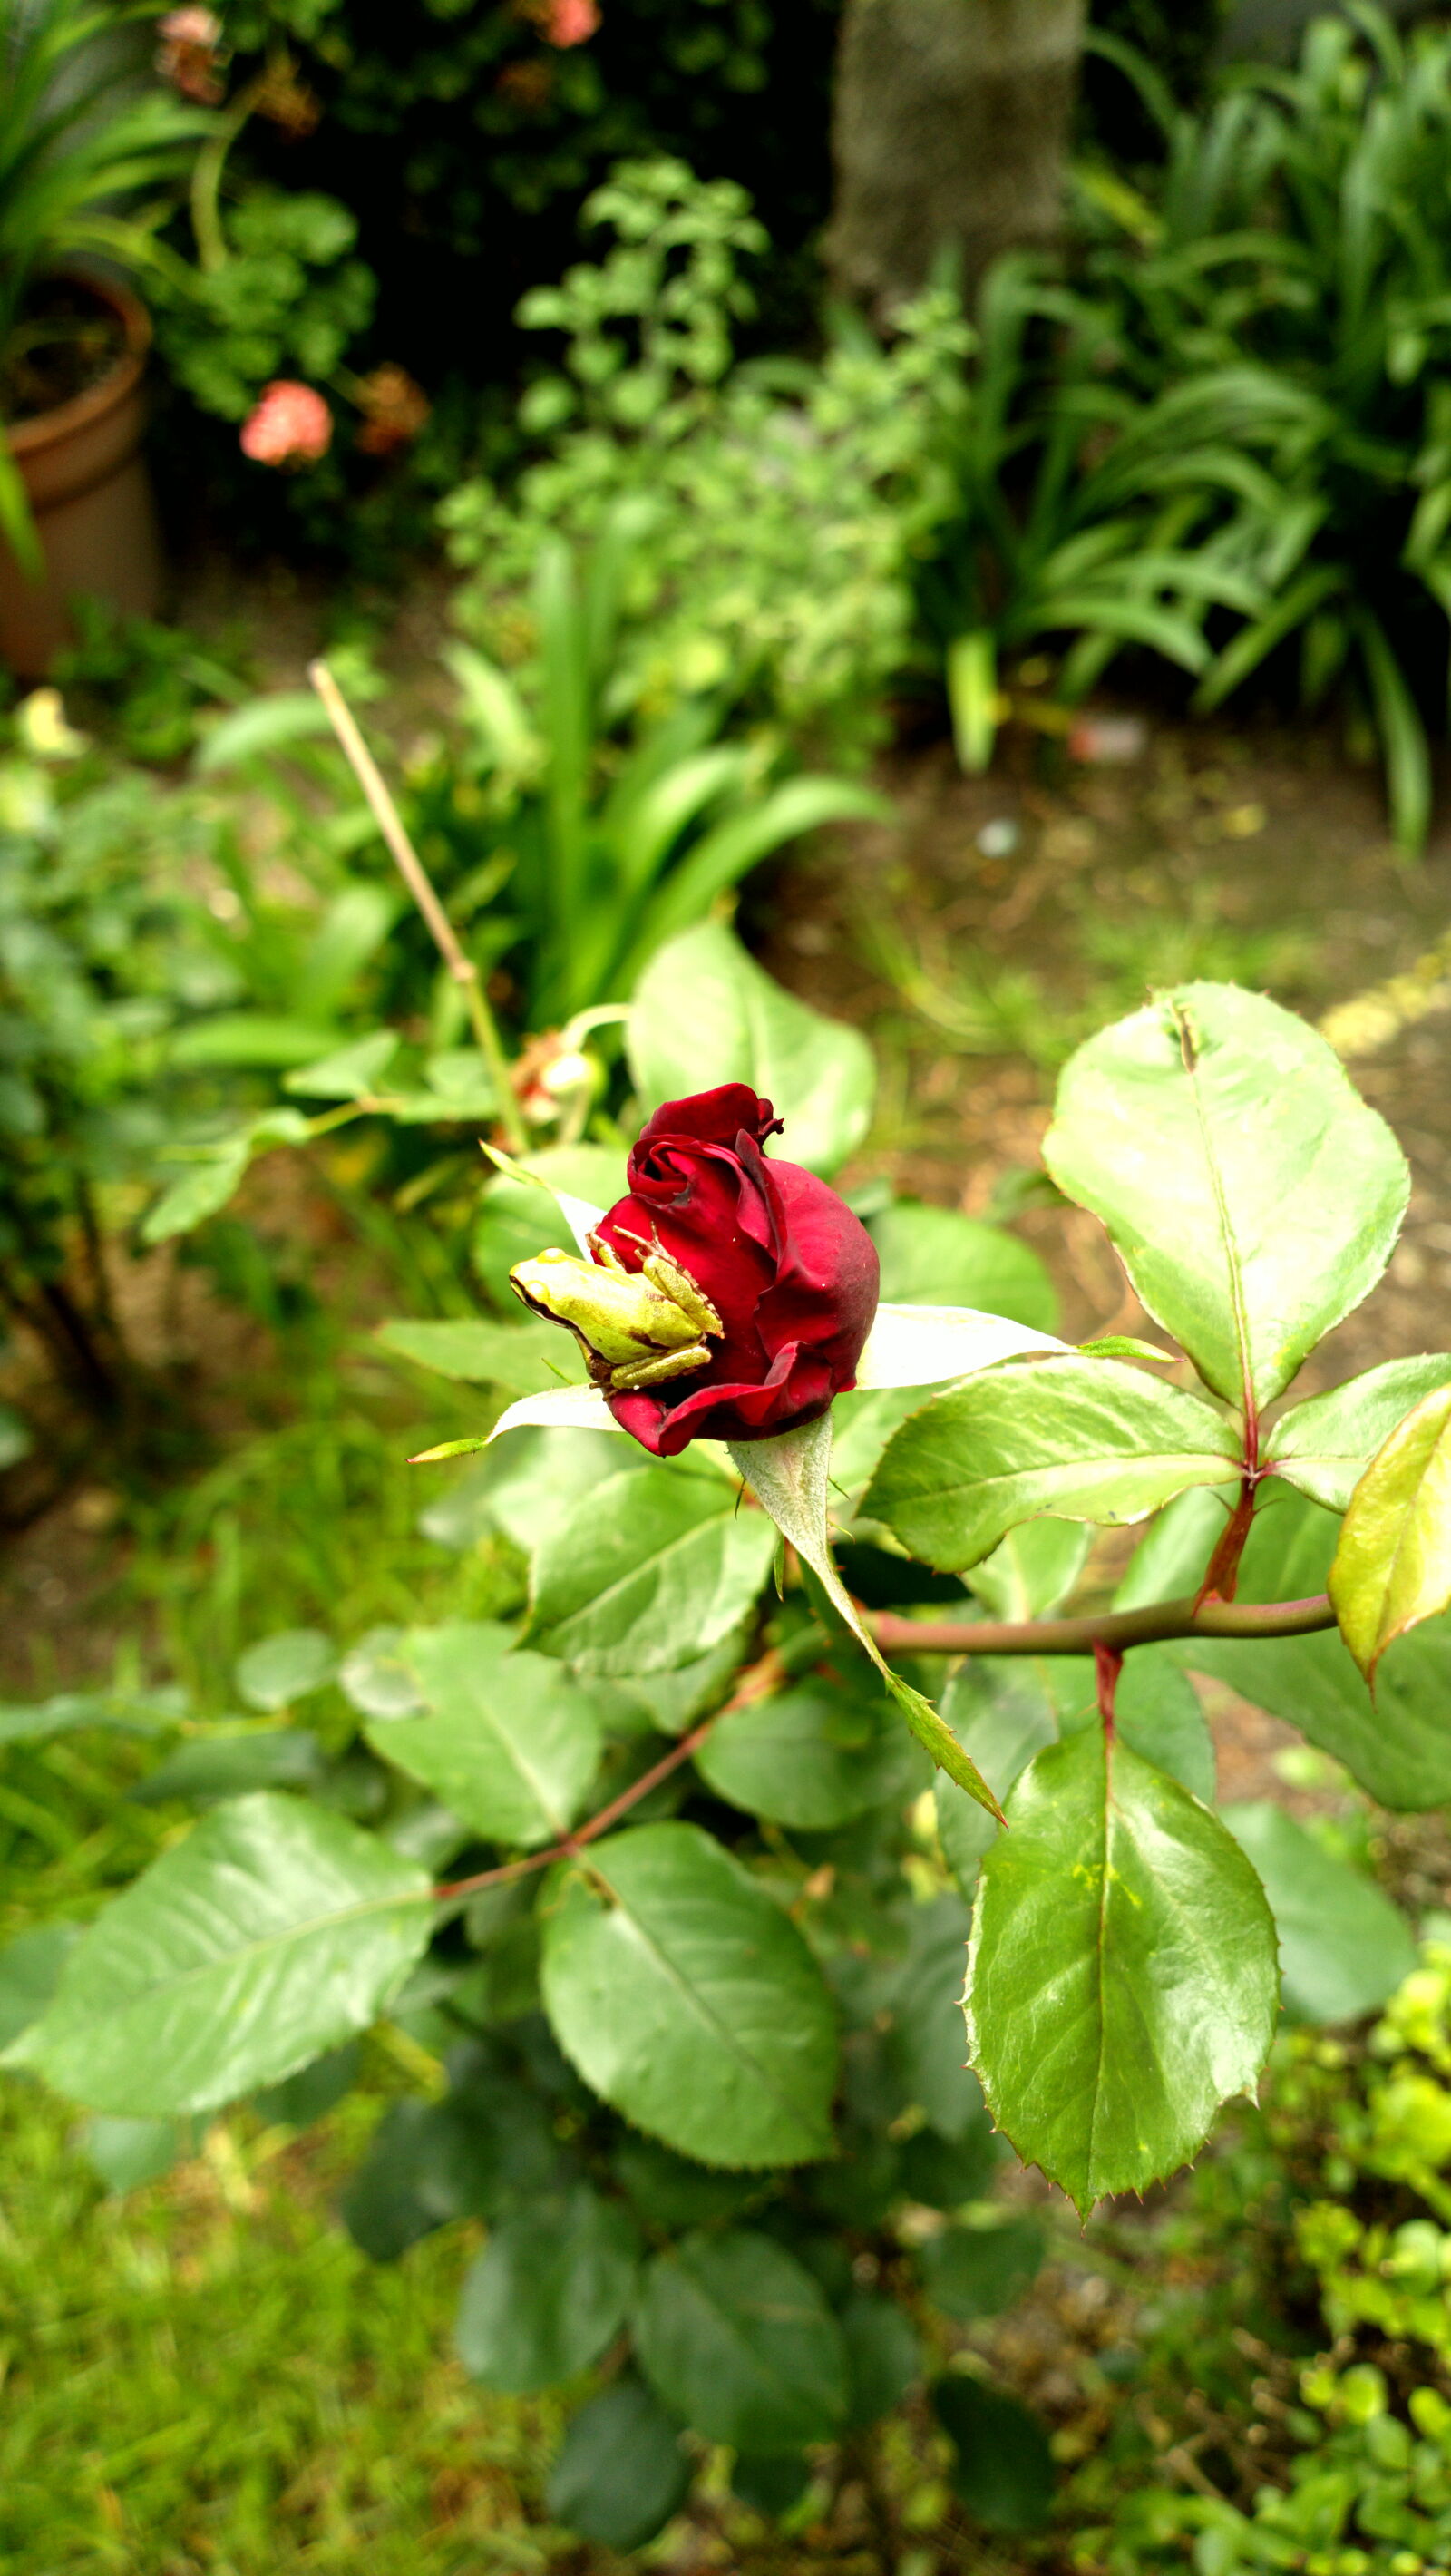 Nokia 808 PureView sample photo. Garden, flower, nature, red photography